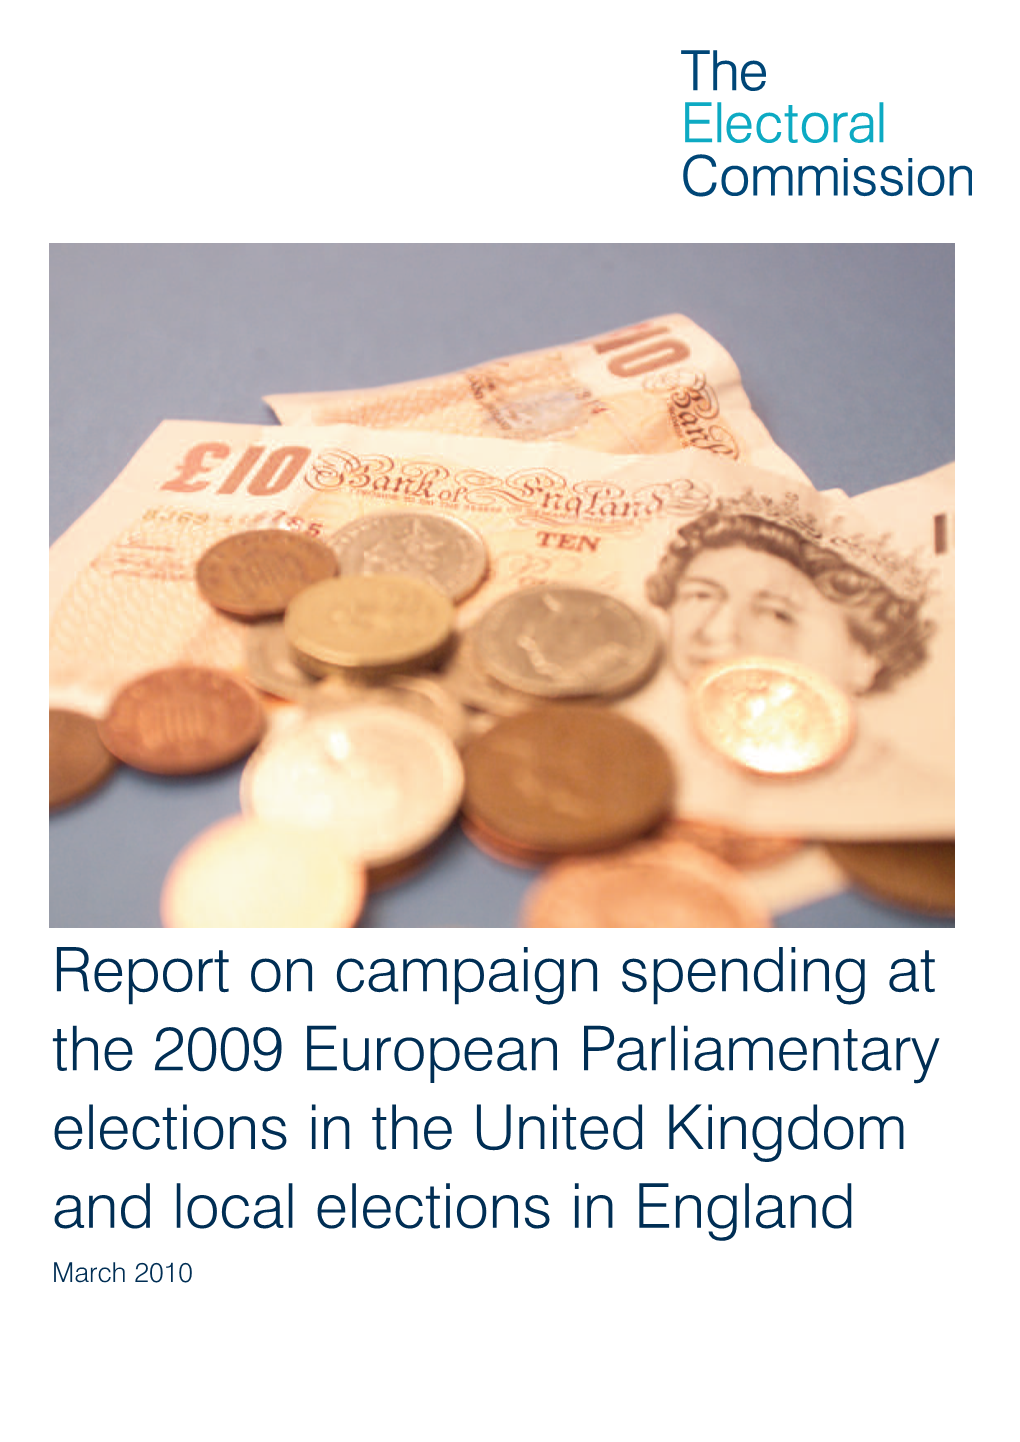 Report on Campaign Spending at the 2009 European Parliamentary